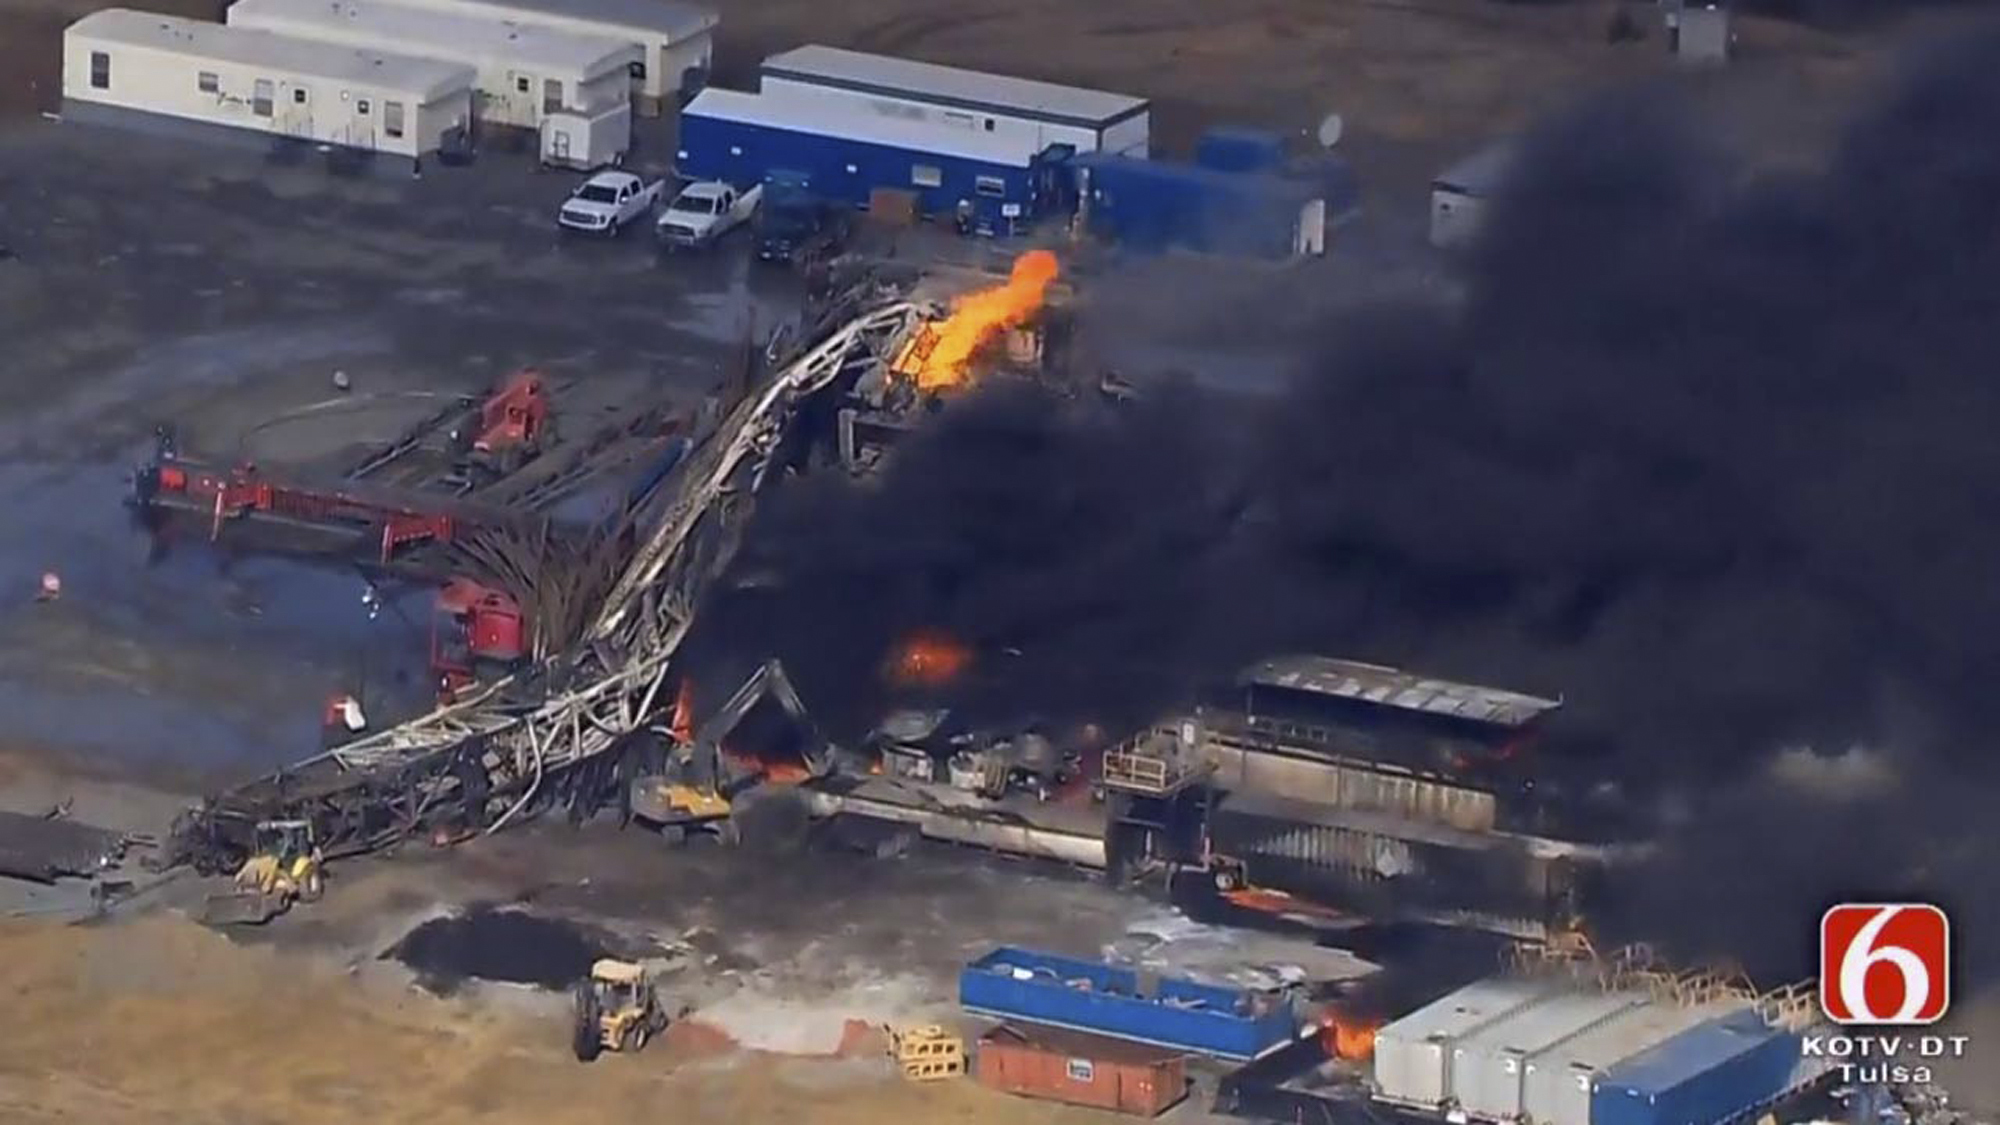 Search resumes for missing after Oklahoma rig explosion - Houston Chronicle2000 x 1125